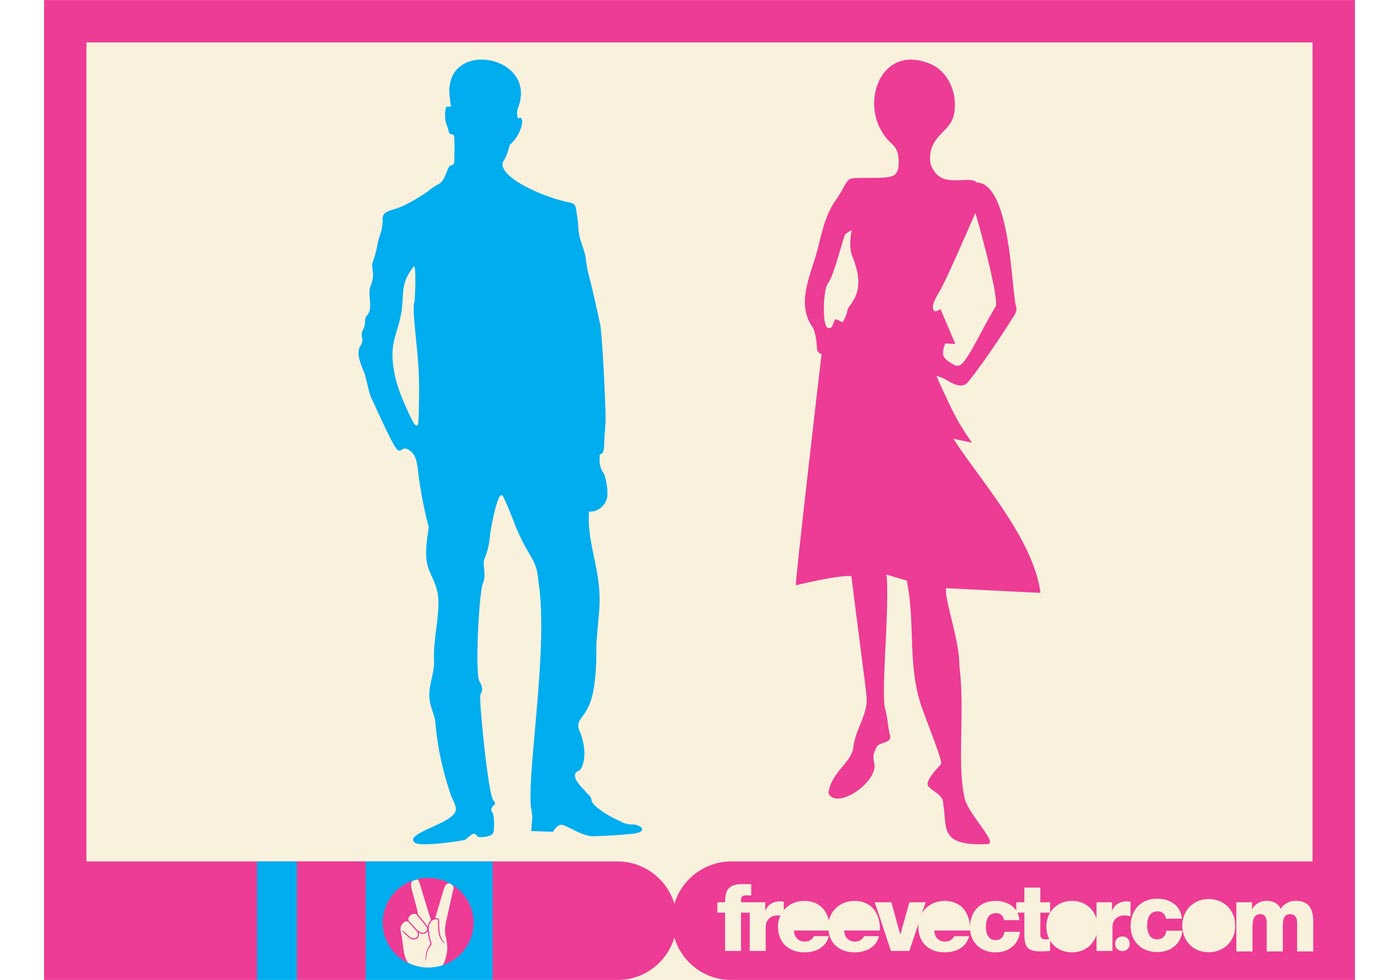 Download Man And Woman Silhouettes - Download Free Vector Art, Stock Graphics & Images